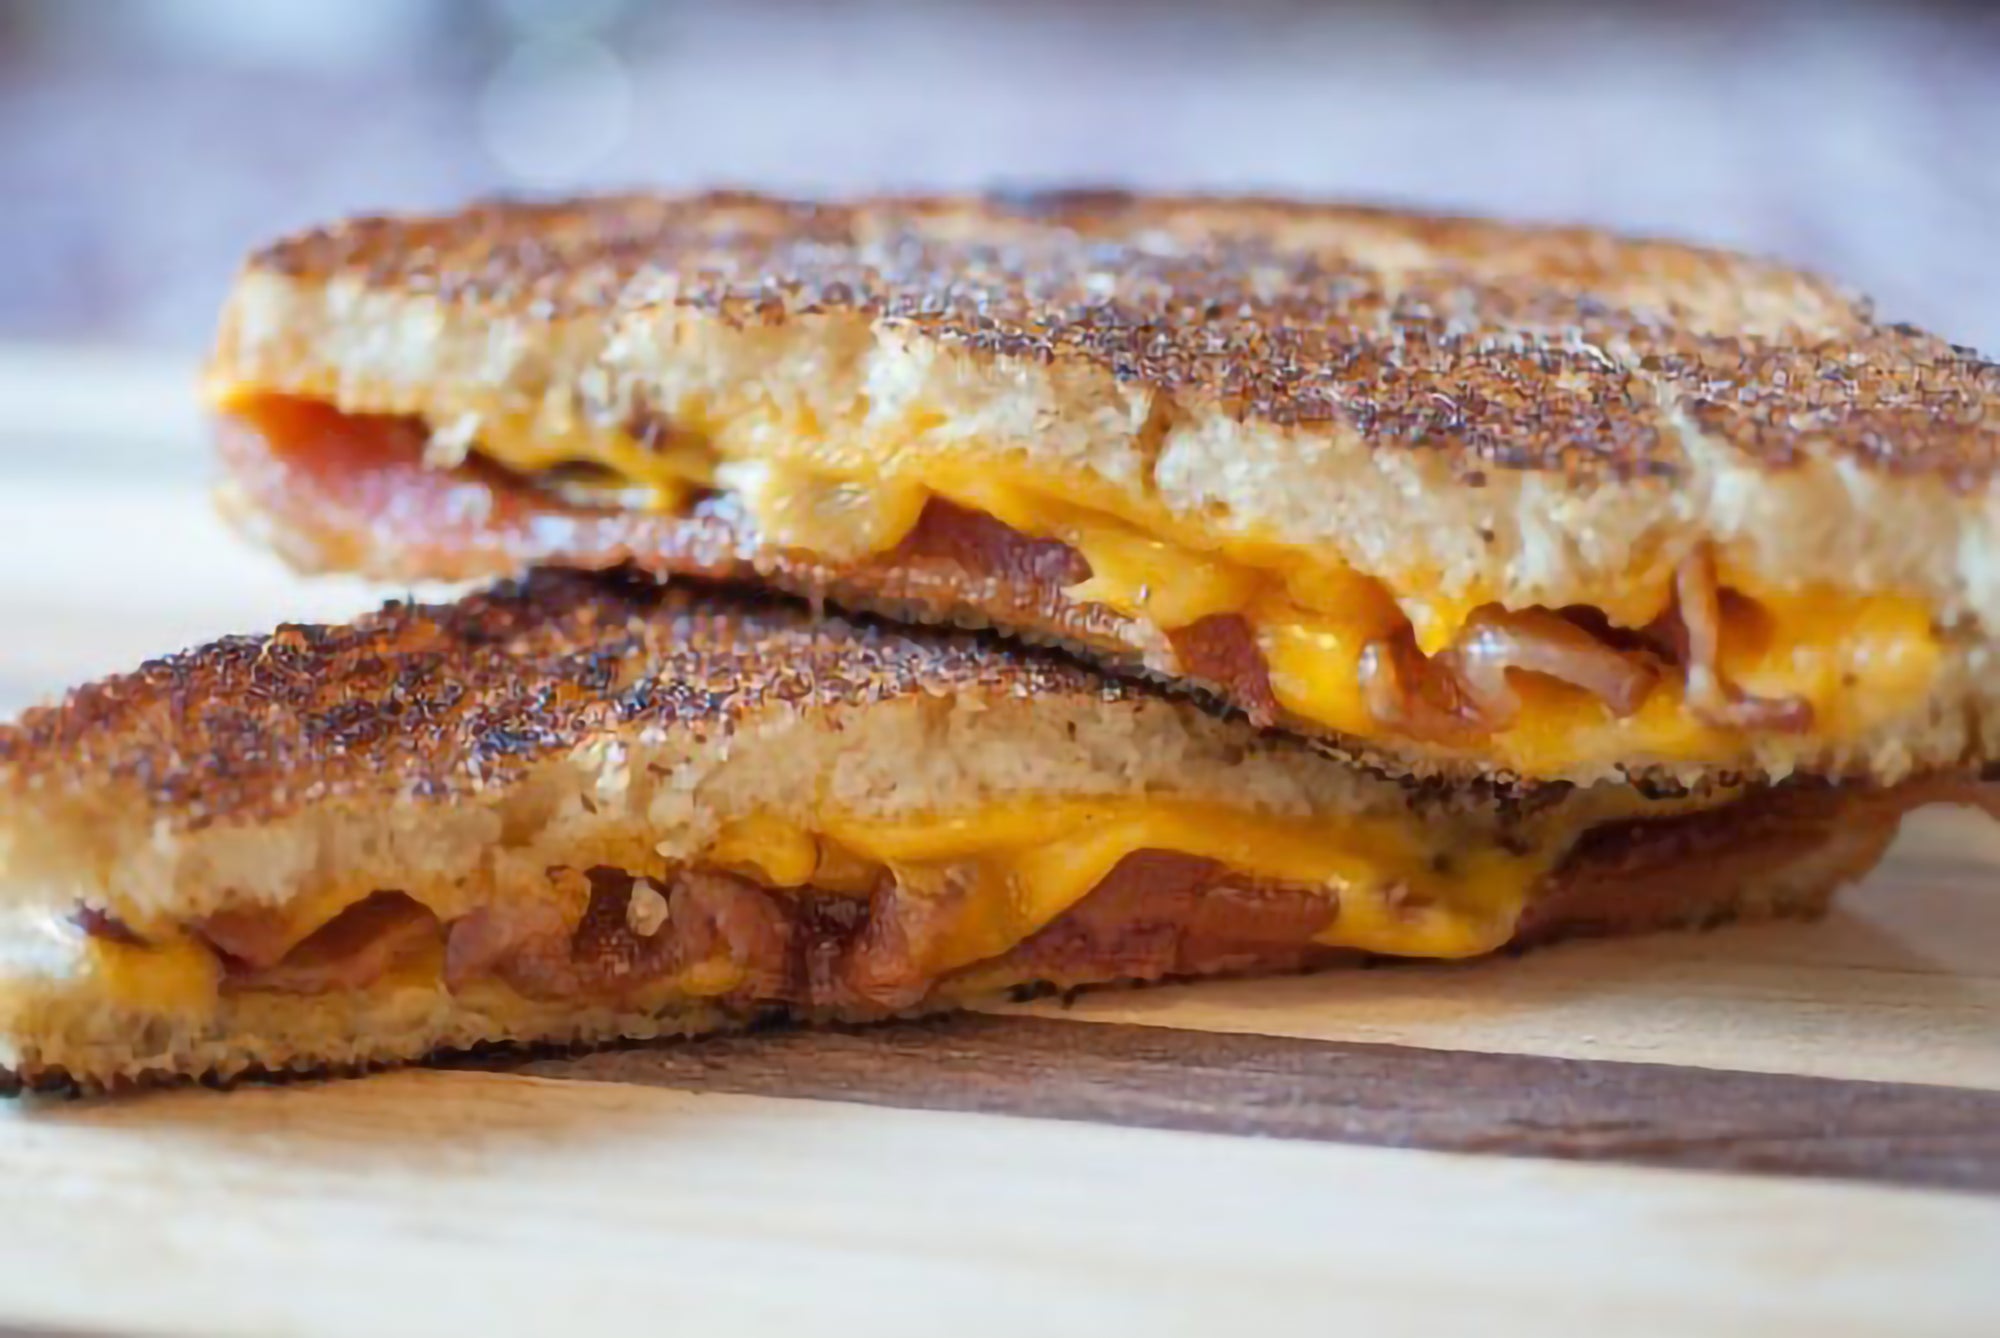 Grilled Cheese made with Maple Syrup butter